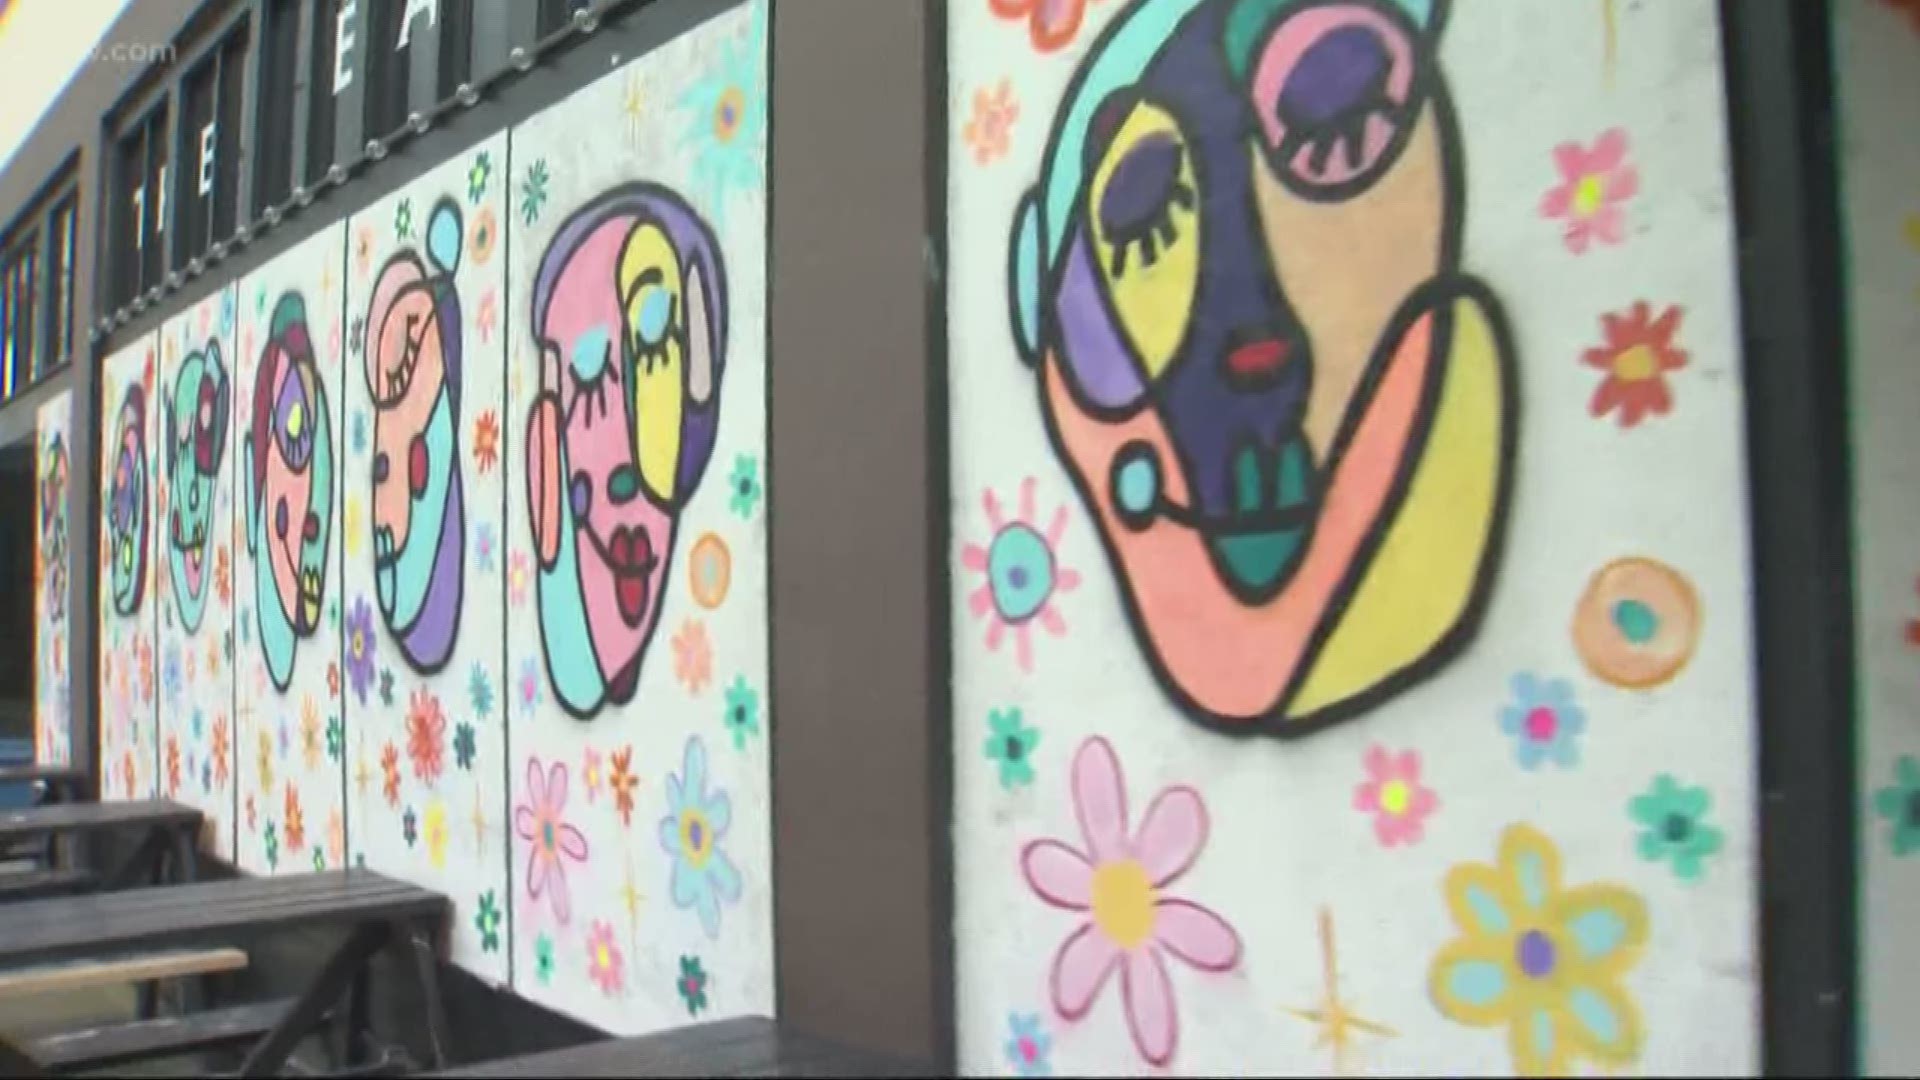 Artists are painting the plywood that covers the windows of closed businesses and spreading a message of hope.